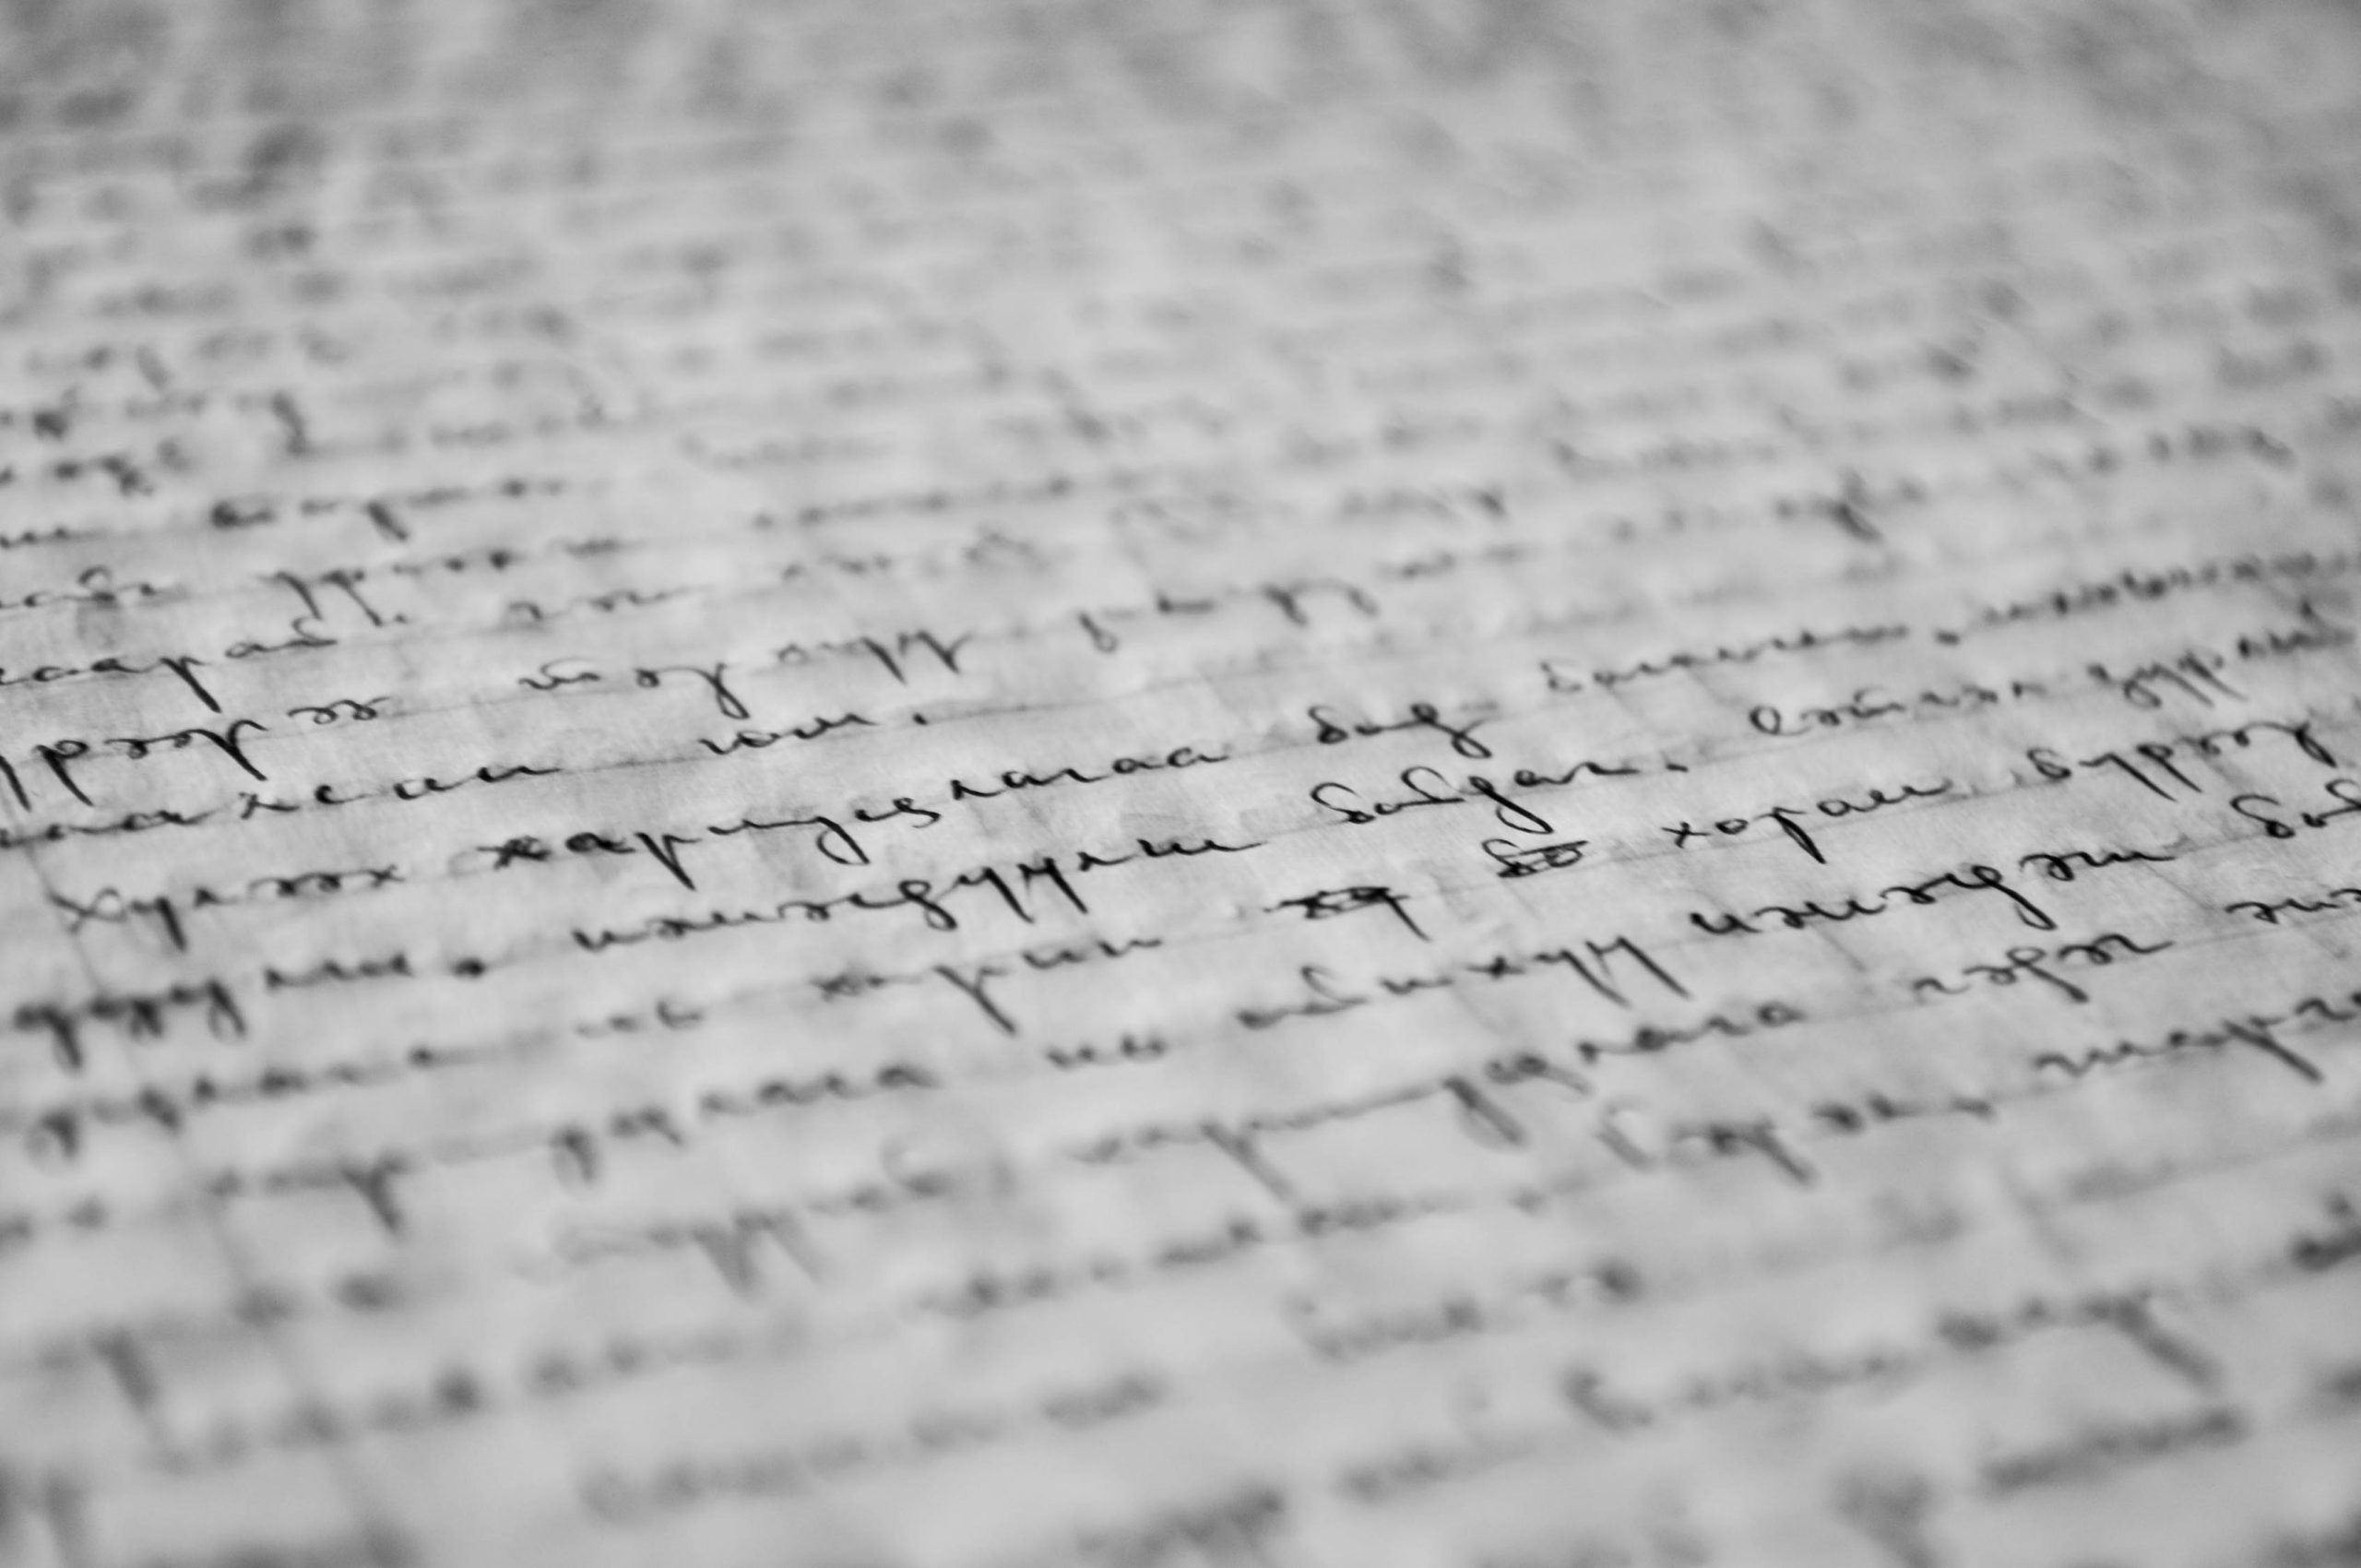 Close-up of writing in script